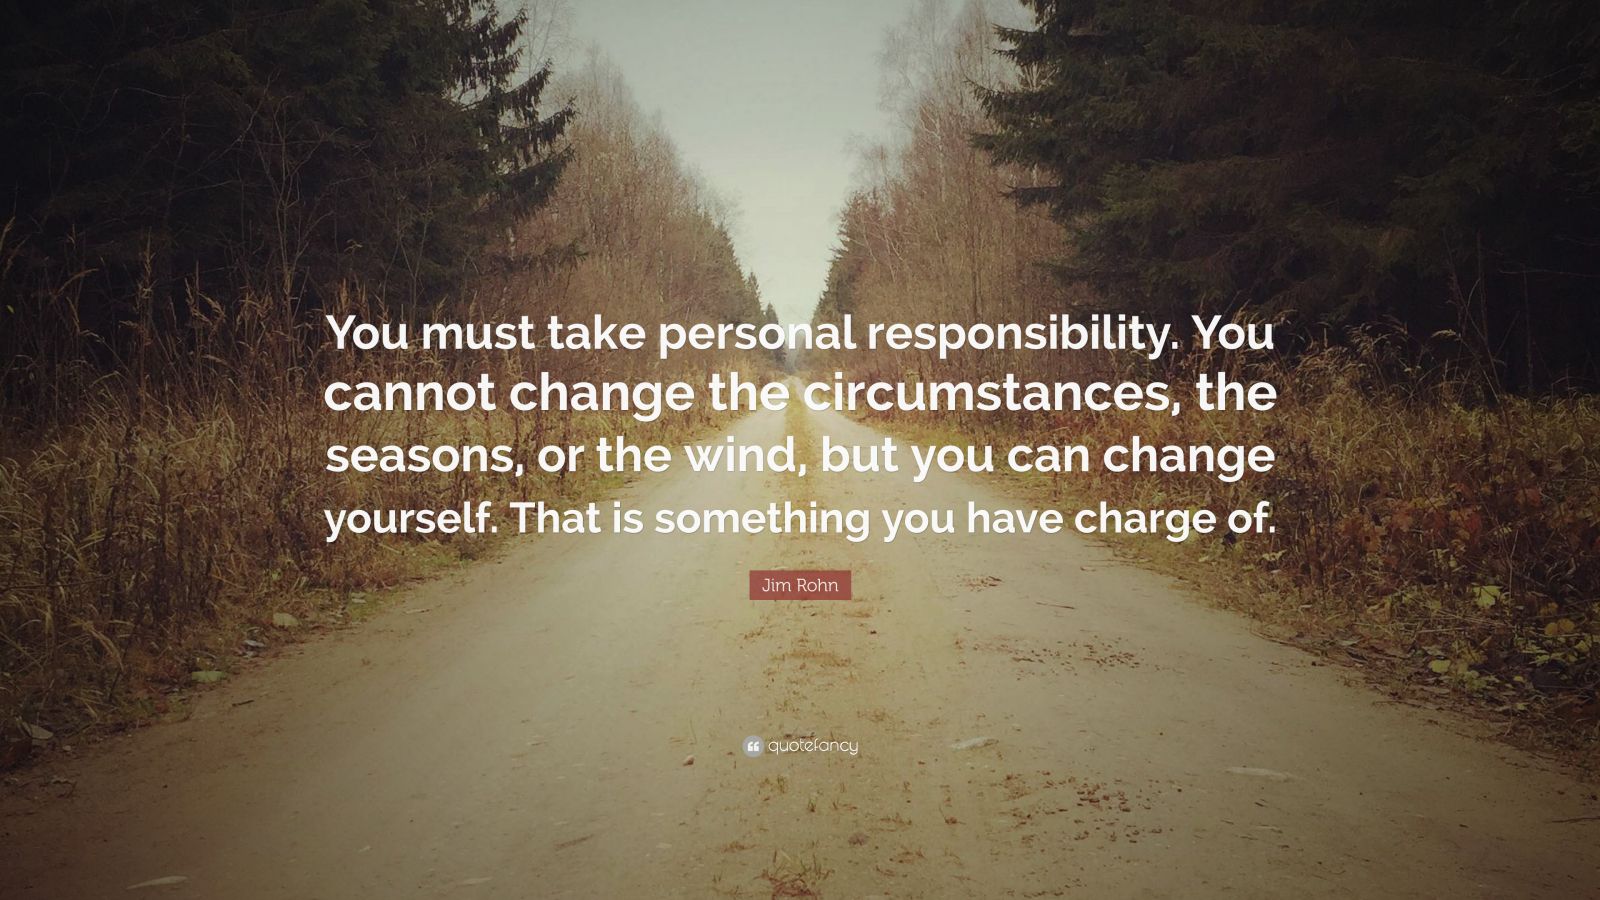 2013087 Jim Rohn Quote You must take personal responsibility You cannot